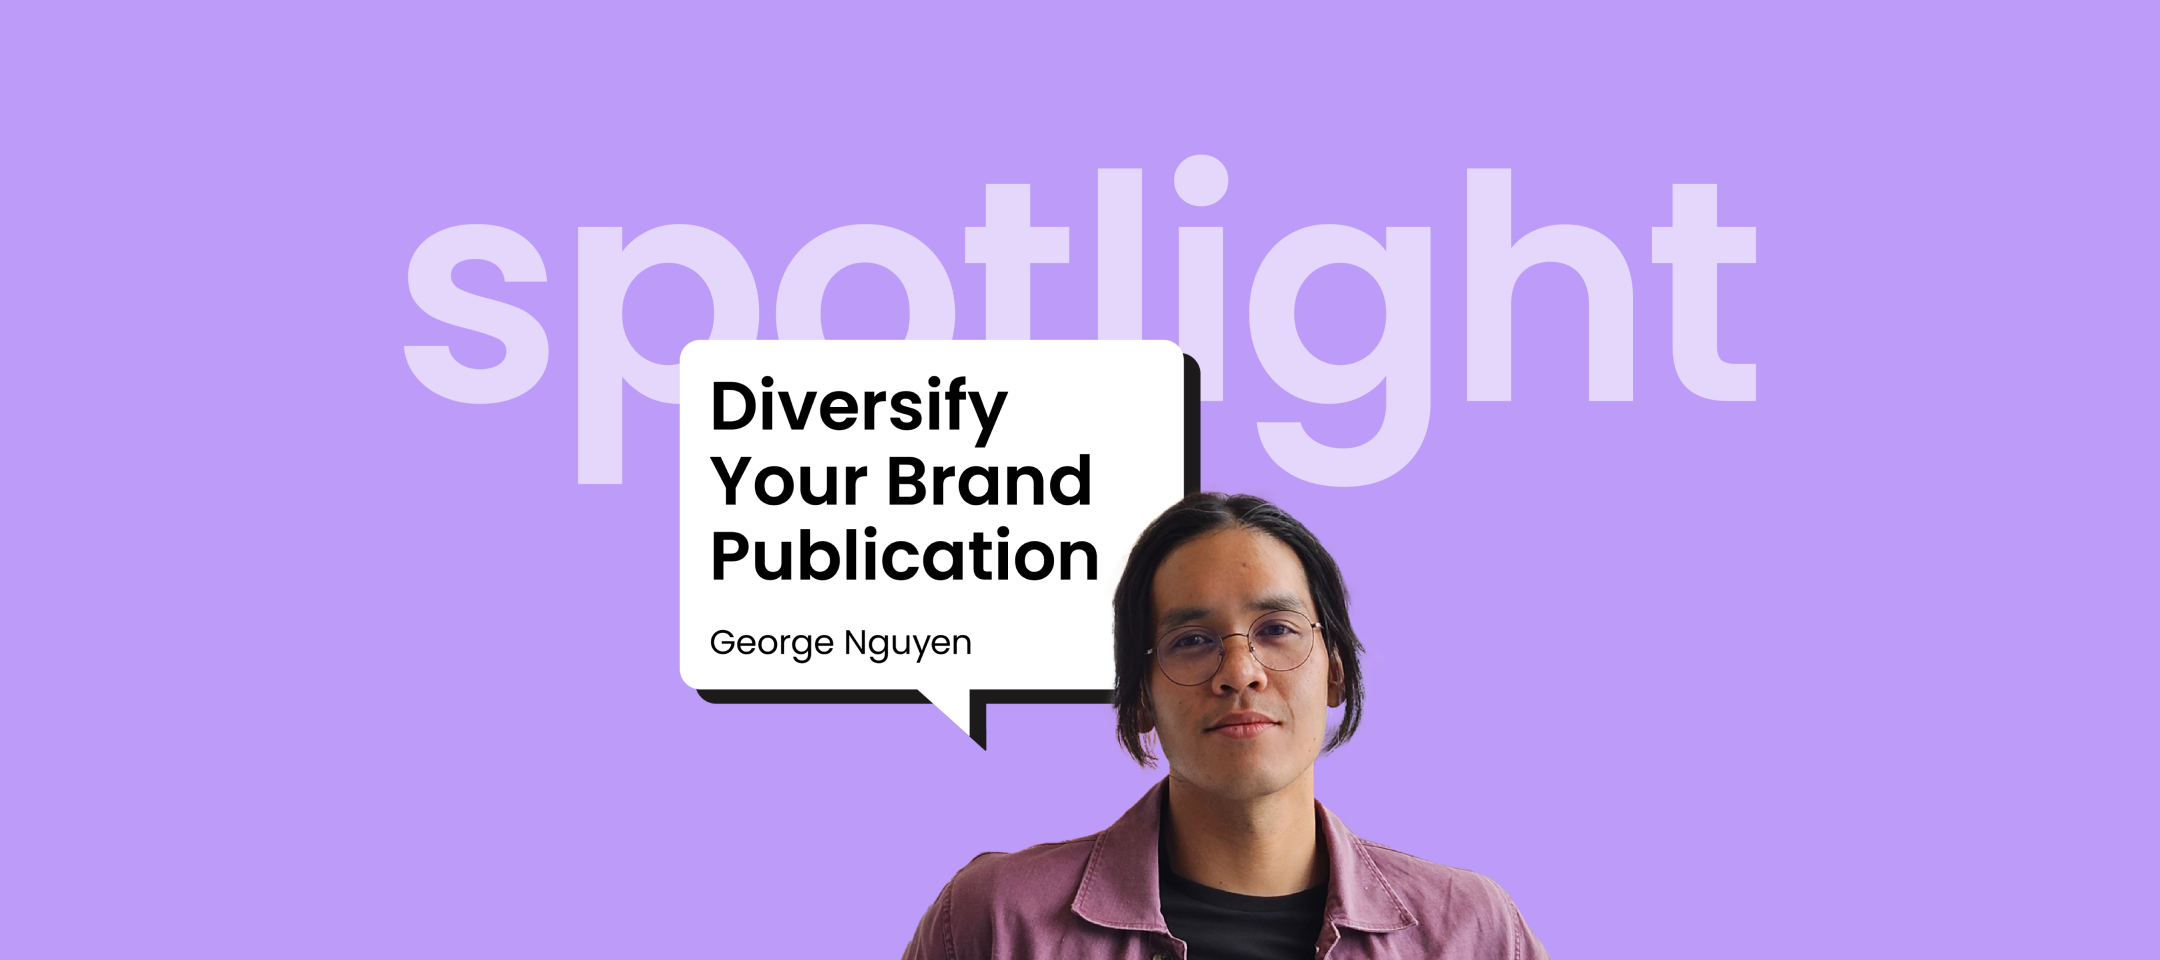 Diversify Your Brand Publication: Why and How to Get Started